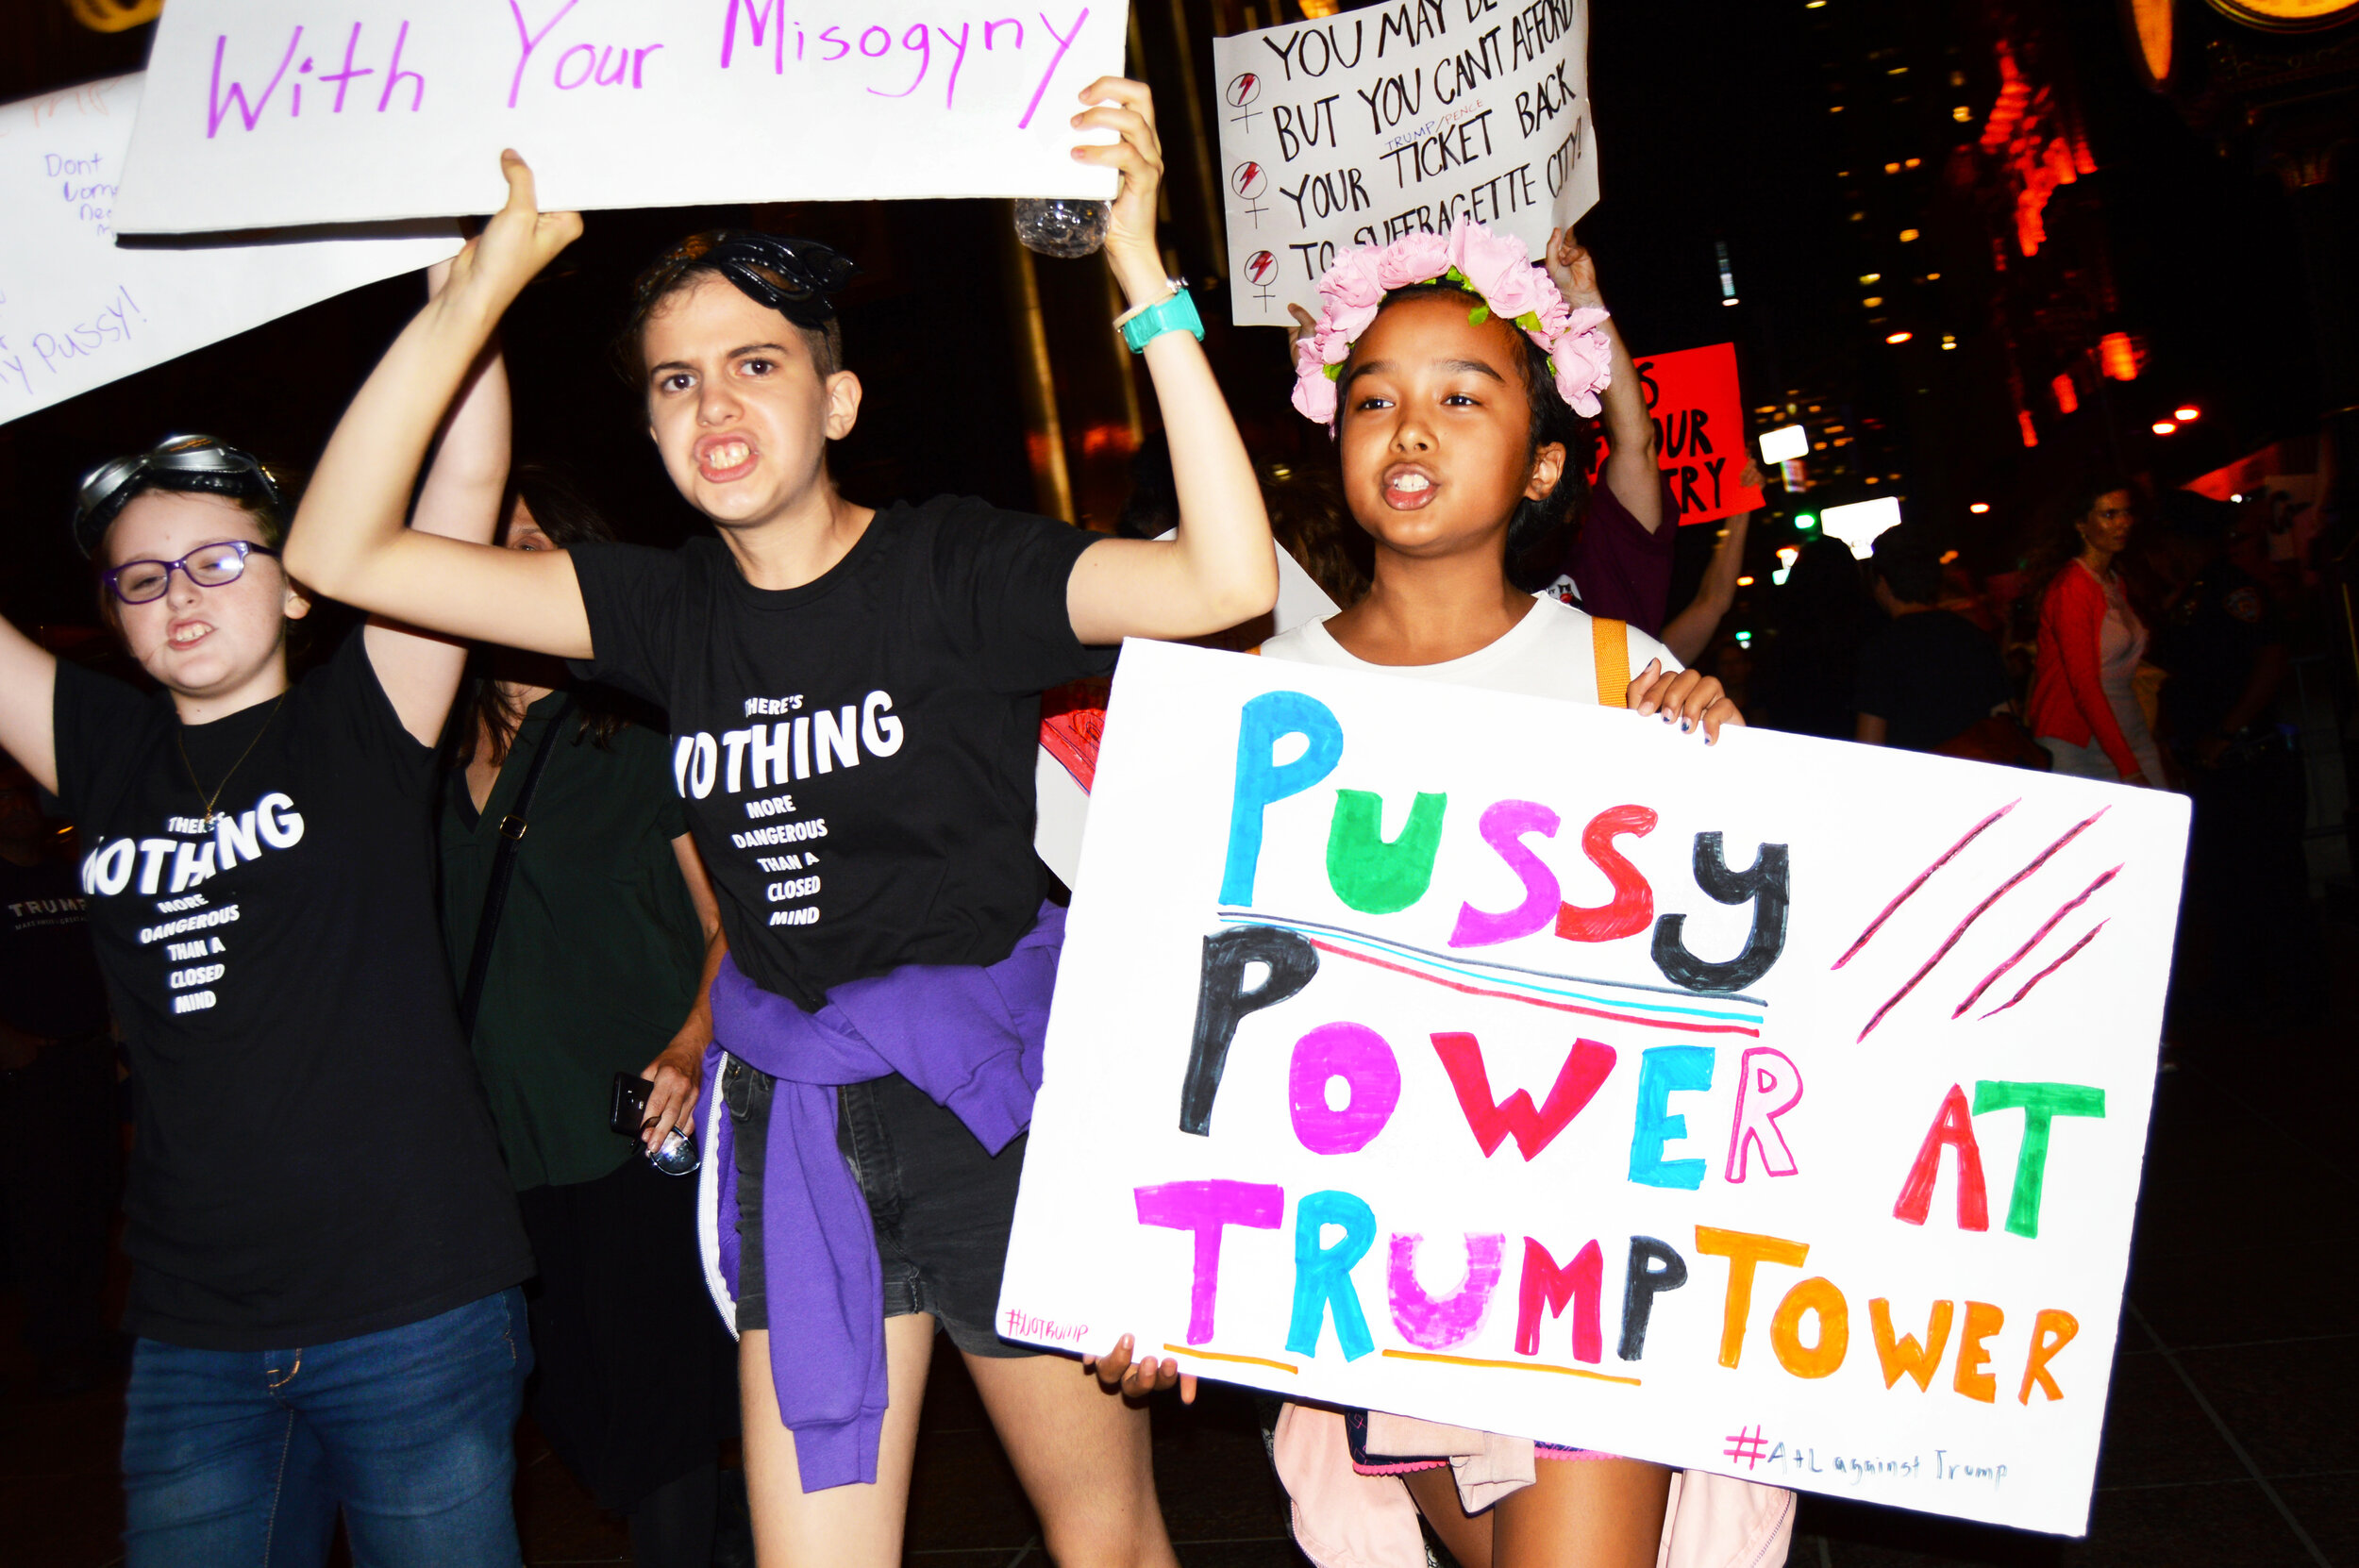  Angry kids at a Trump Tower protest. 